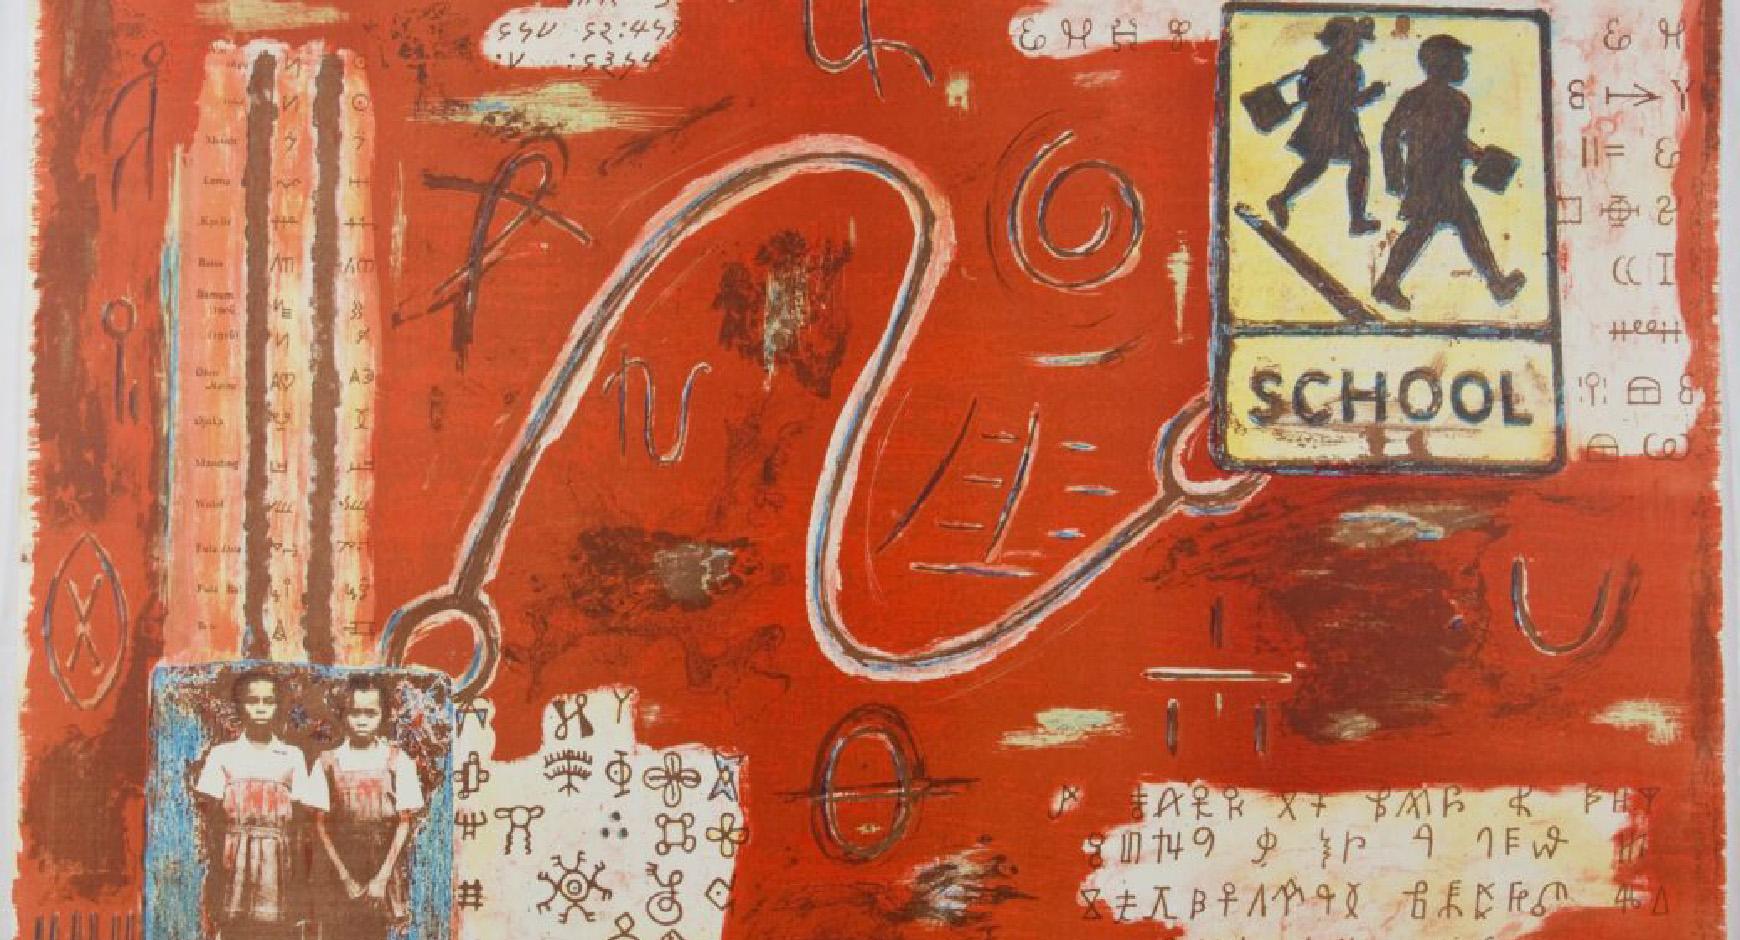 The image is a piece of folk-inspired modern art by Terry Boddie.  It features two school-aged girls dressed in mid-20th century clothes in the bottom left and a traditional yellow school crossing traffic sign in the upper right.  The two images seem to be connected by a grasping cord and are painted onto a field of red.